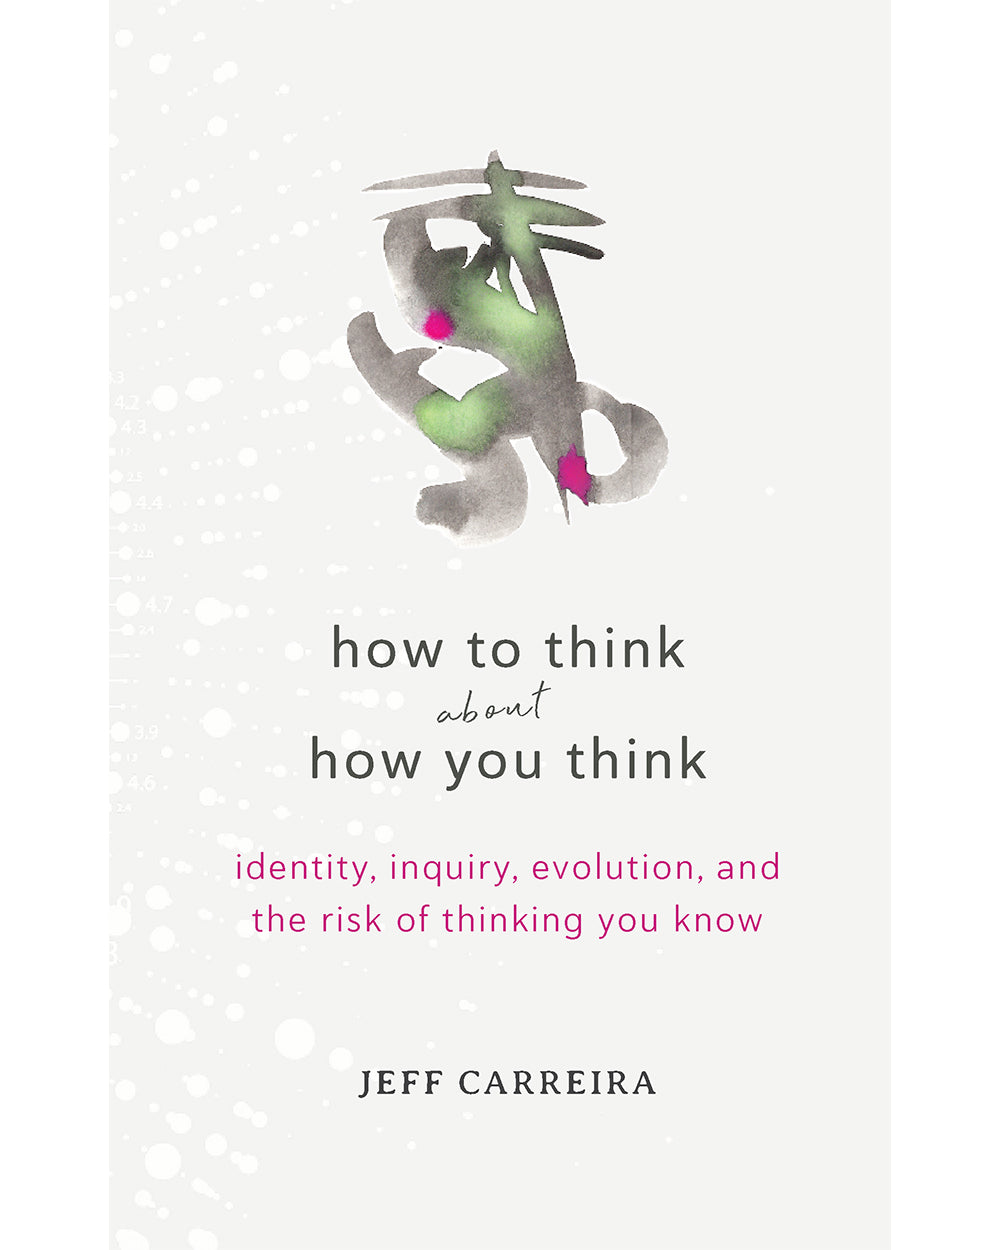 How To Think About How You Think: Identity, Inquiry, Evolution, and the Risk of Thinking You Know